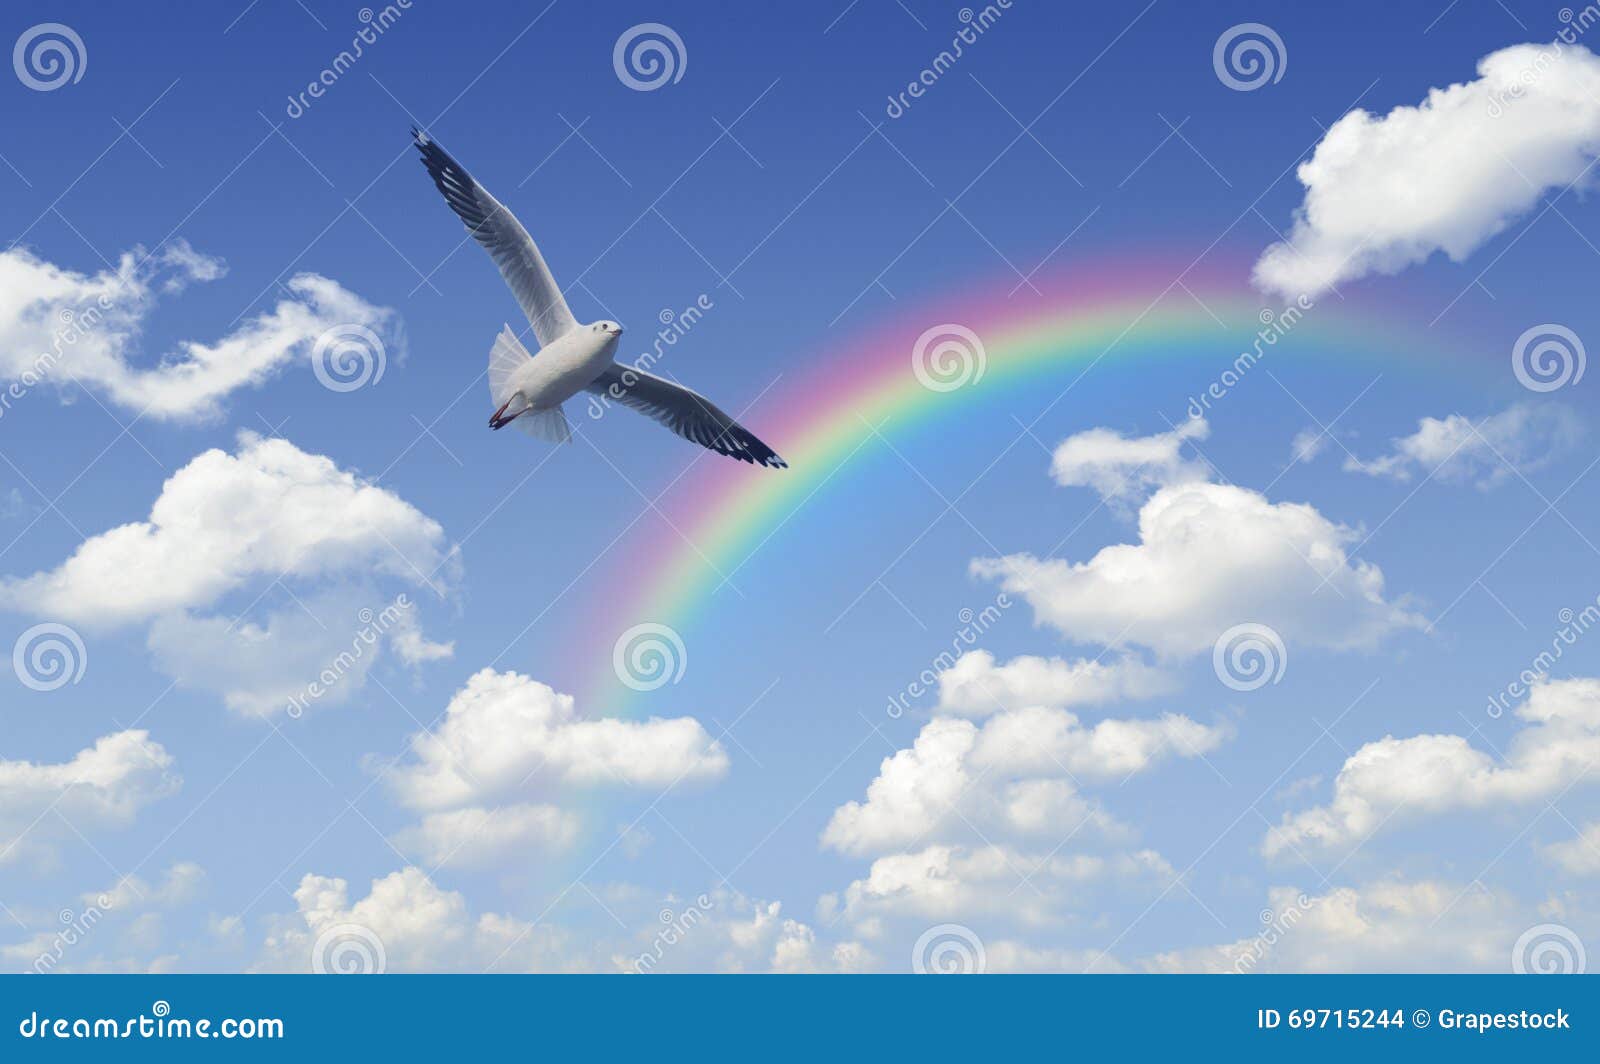 seagull flying over rainbow with white clouds and blue sky, free